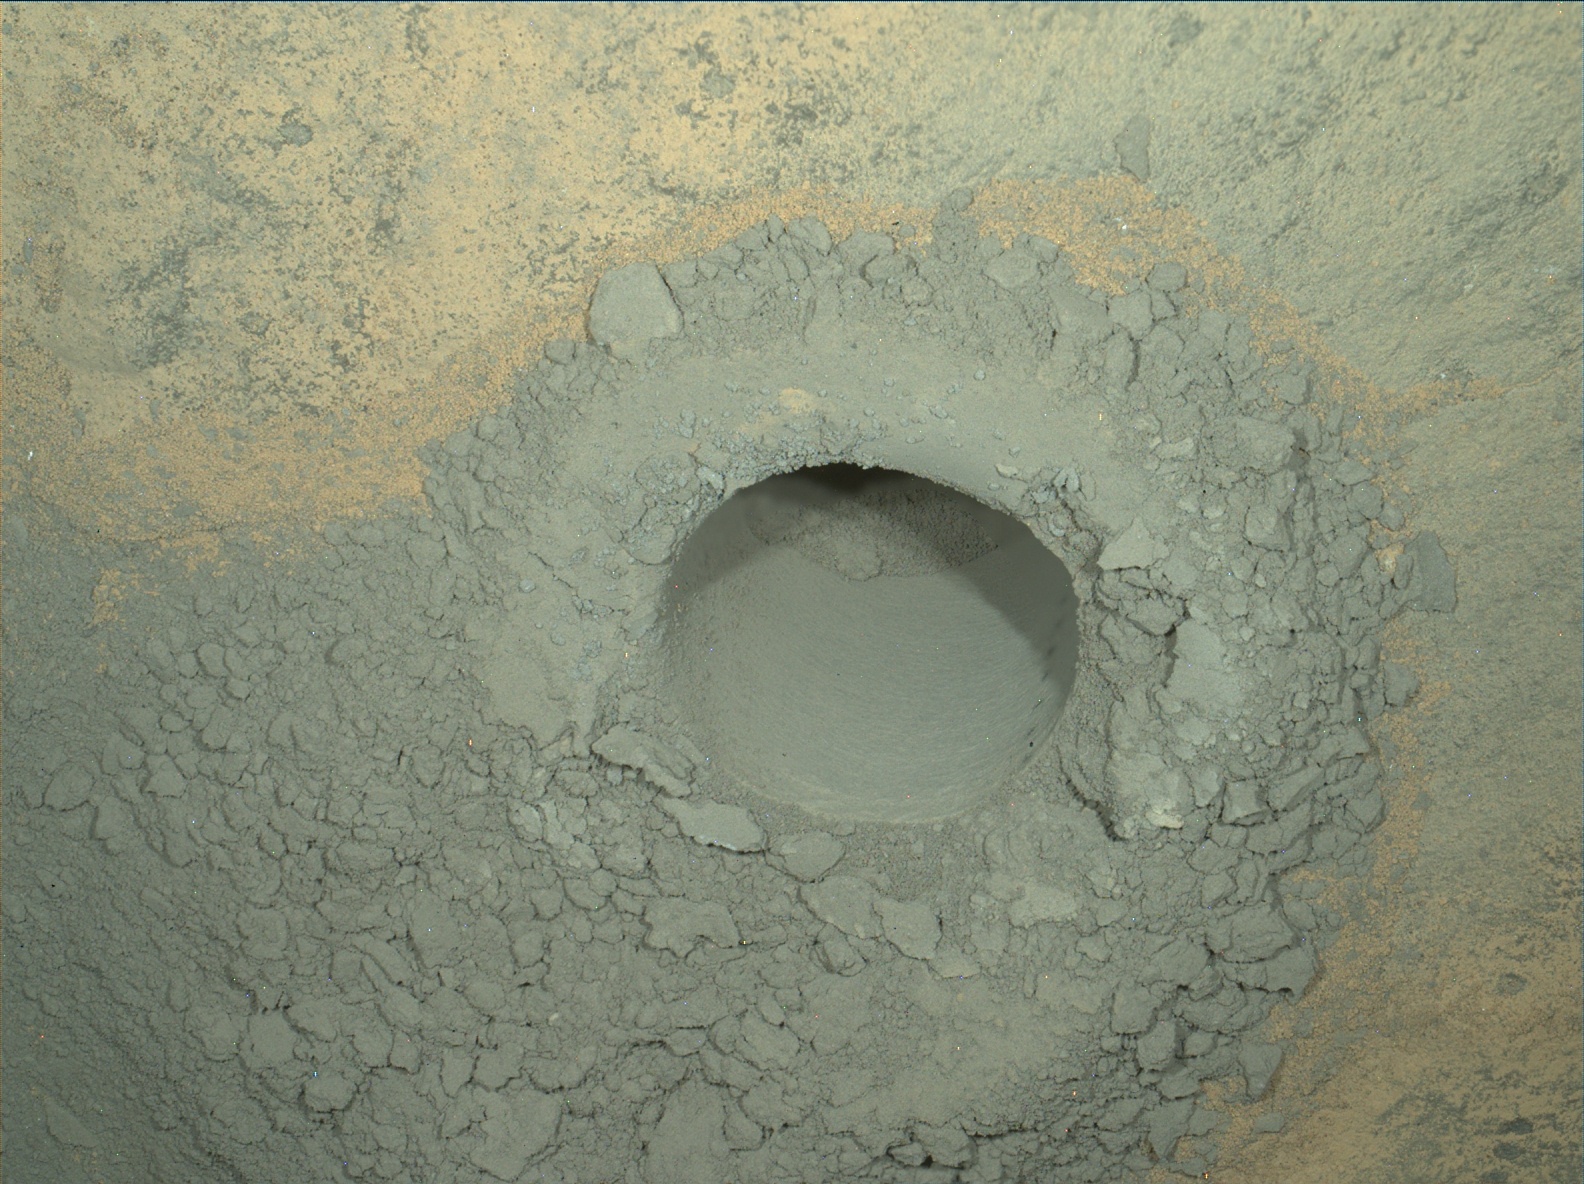 Nasa's Mars rover Curiosity acquired this image using its Mars Hand Lens Imager (MAHLI) on Sol 629